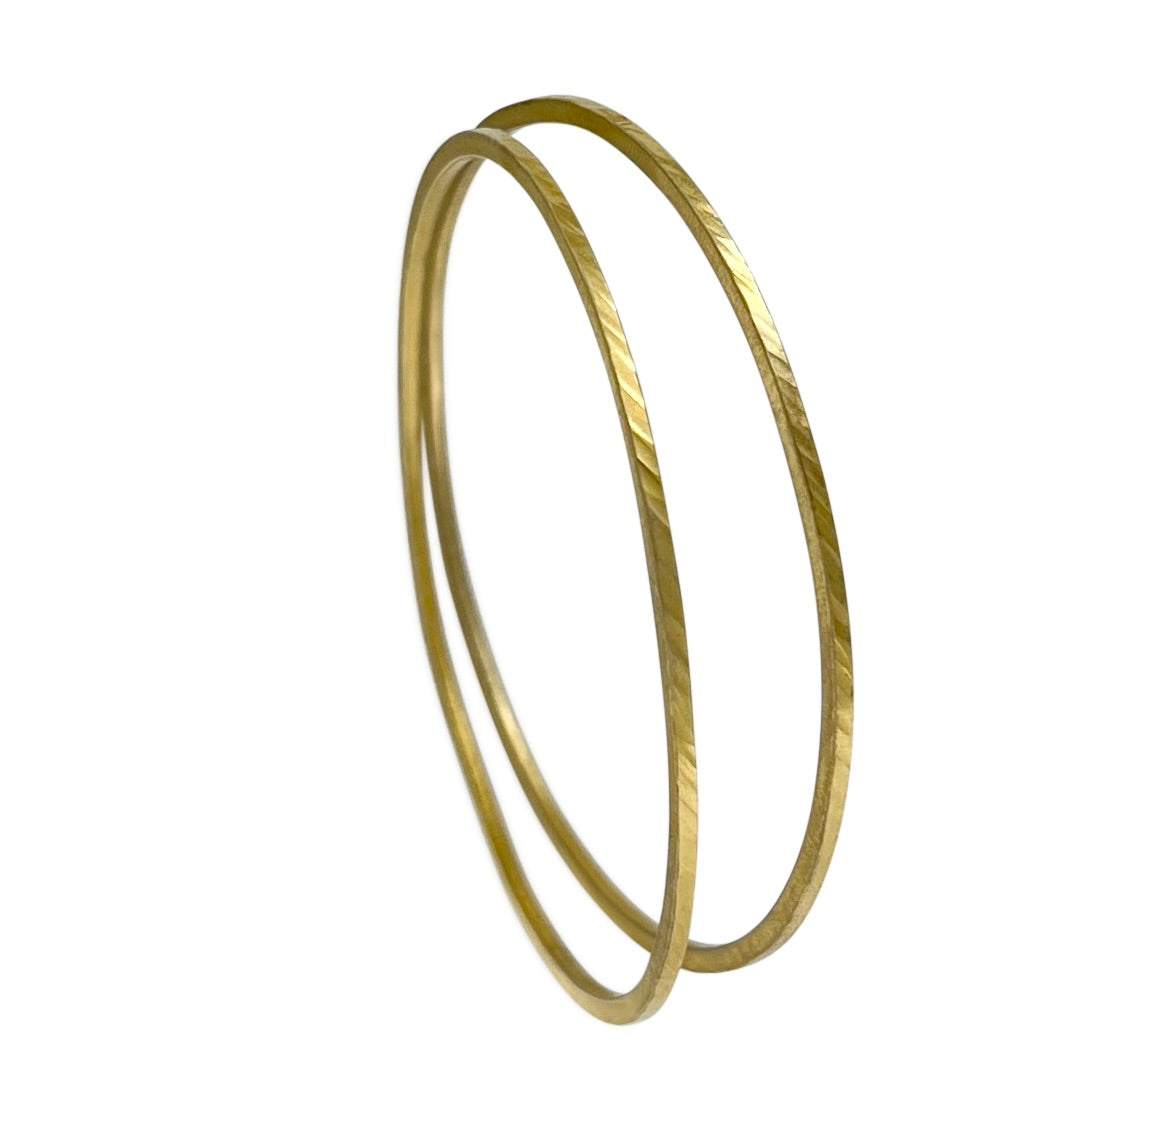 Skinny bangle (1.5mm wide) in sterling silver with Vermeil finish